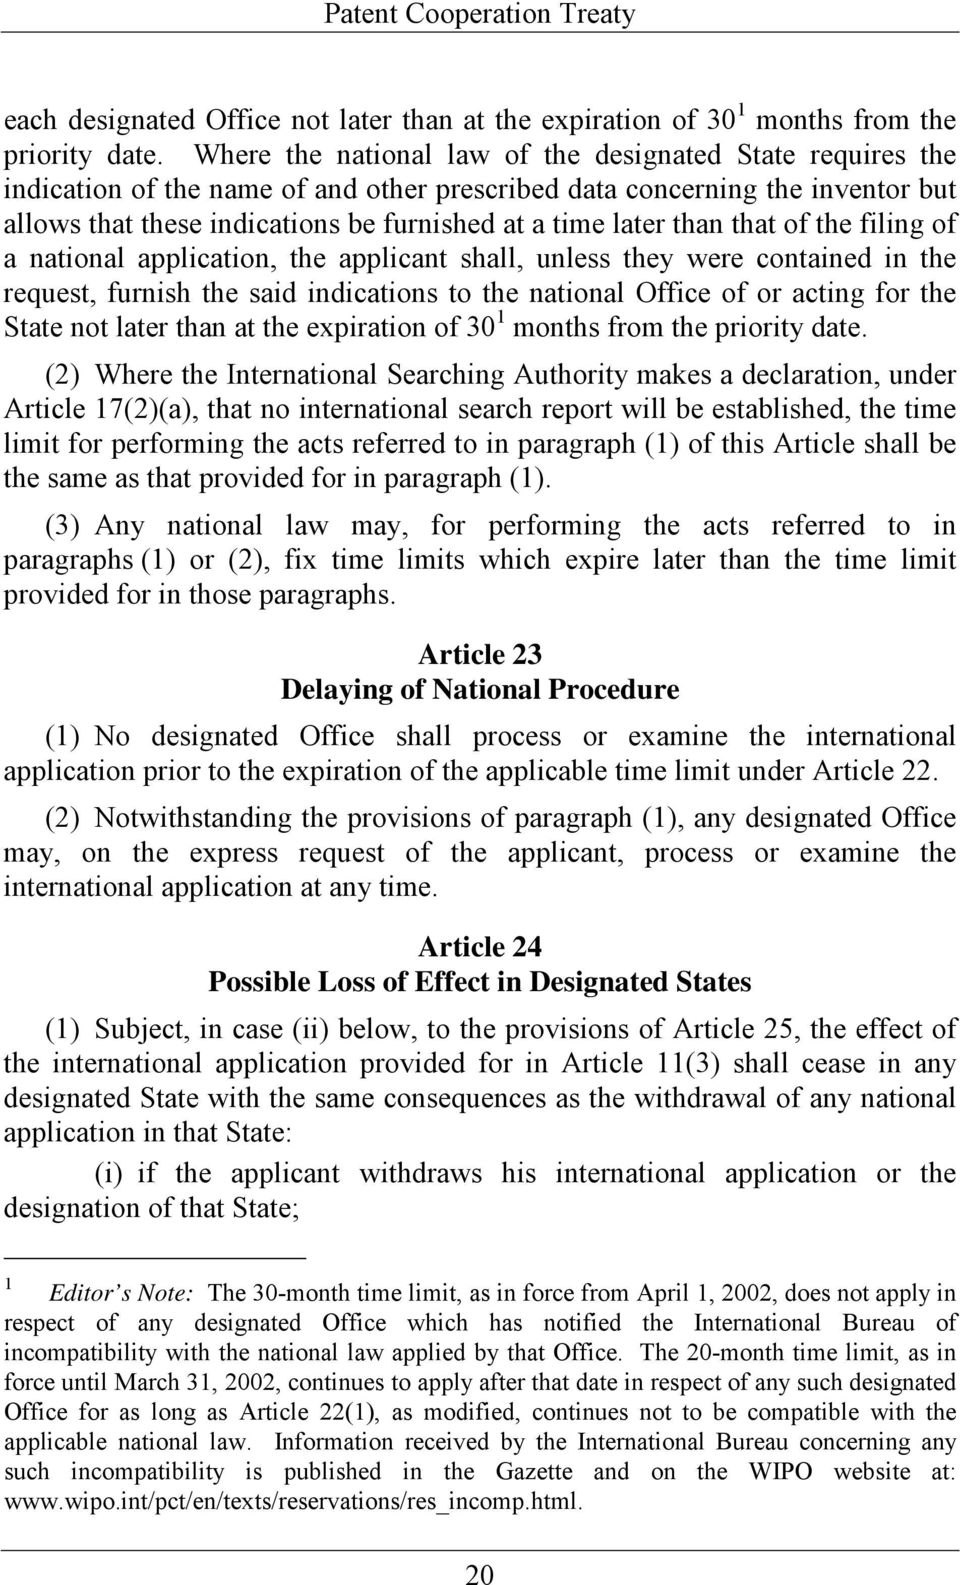 than that of the filing of a national application, the applicant shall, unless they were contained in the request, furnish the said indications to the national Office of or acting for the State not